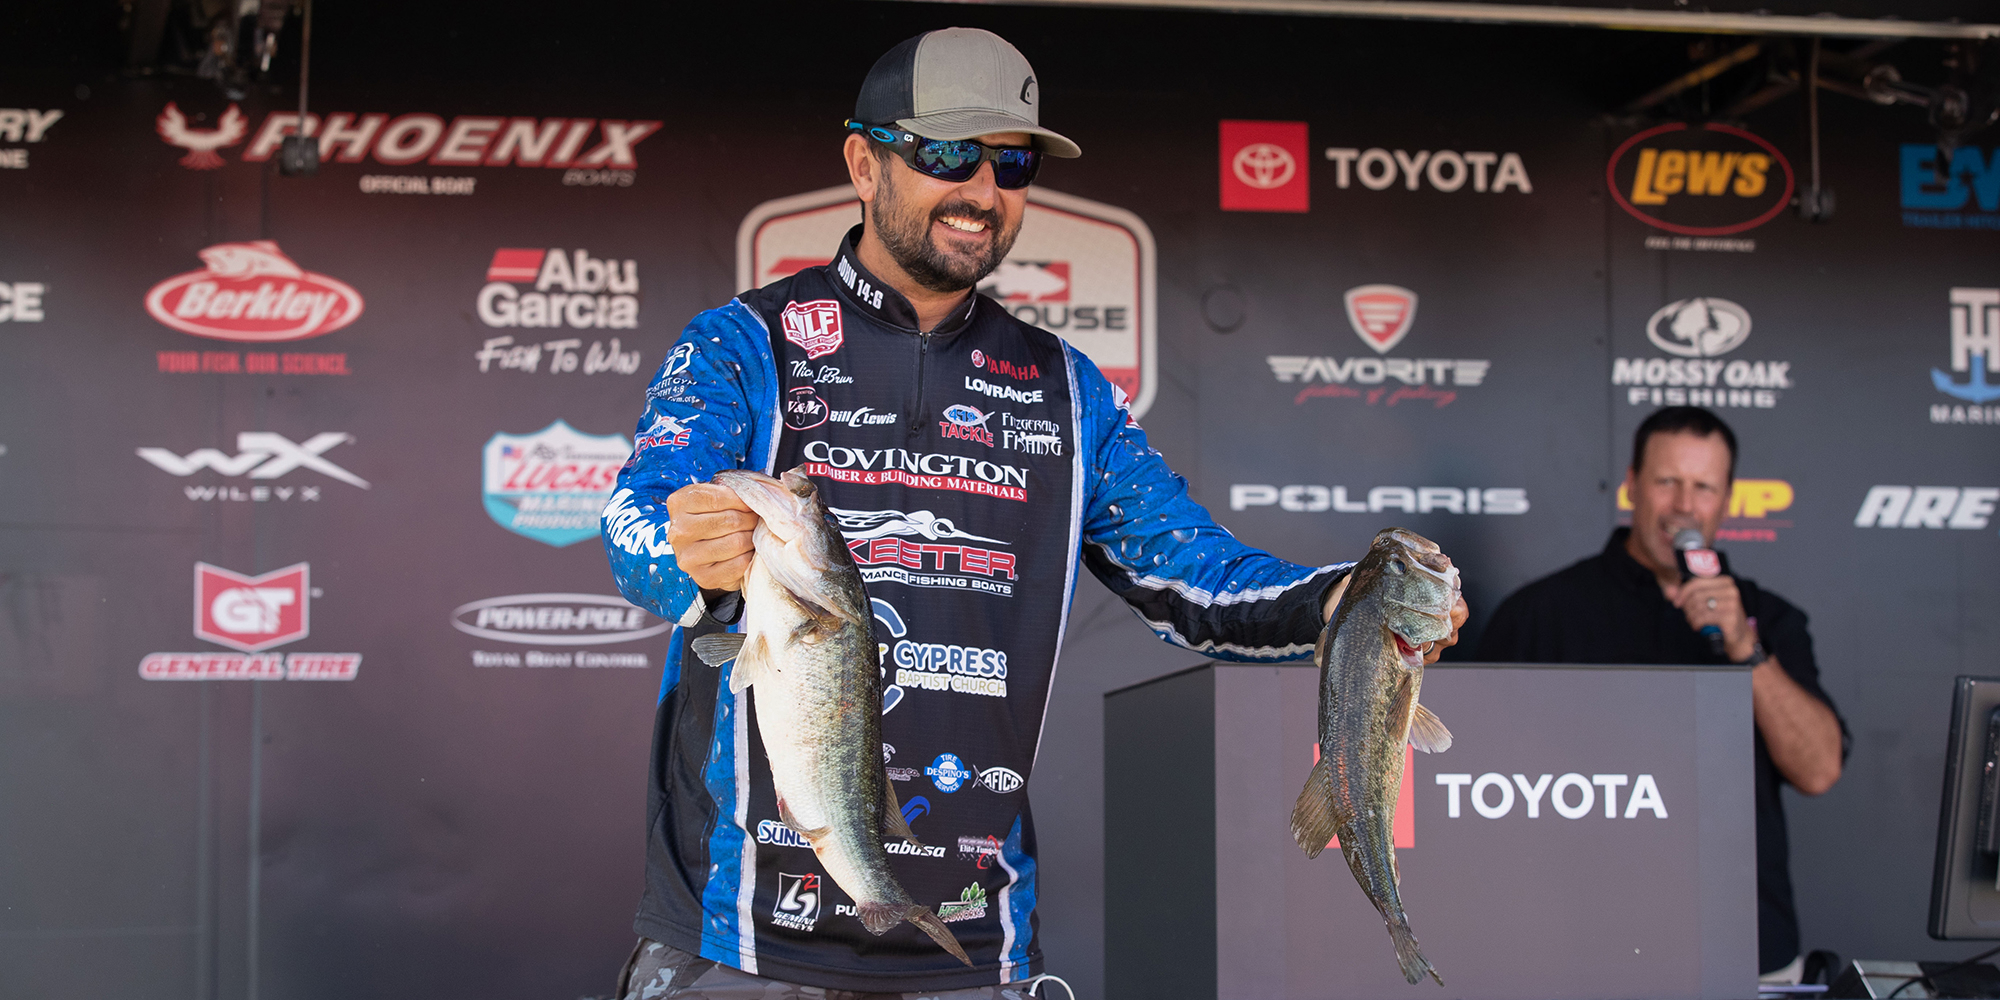 LeBrun Surges to Top on Day 3, Final 10 Set for Championship Day on the  James River - Major League Fishing